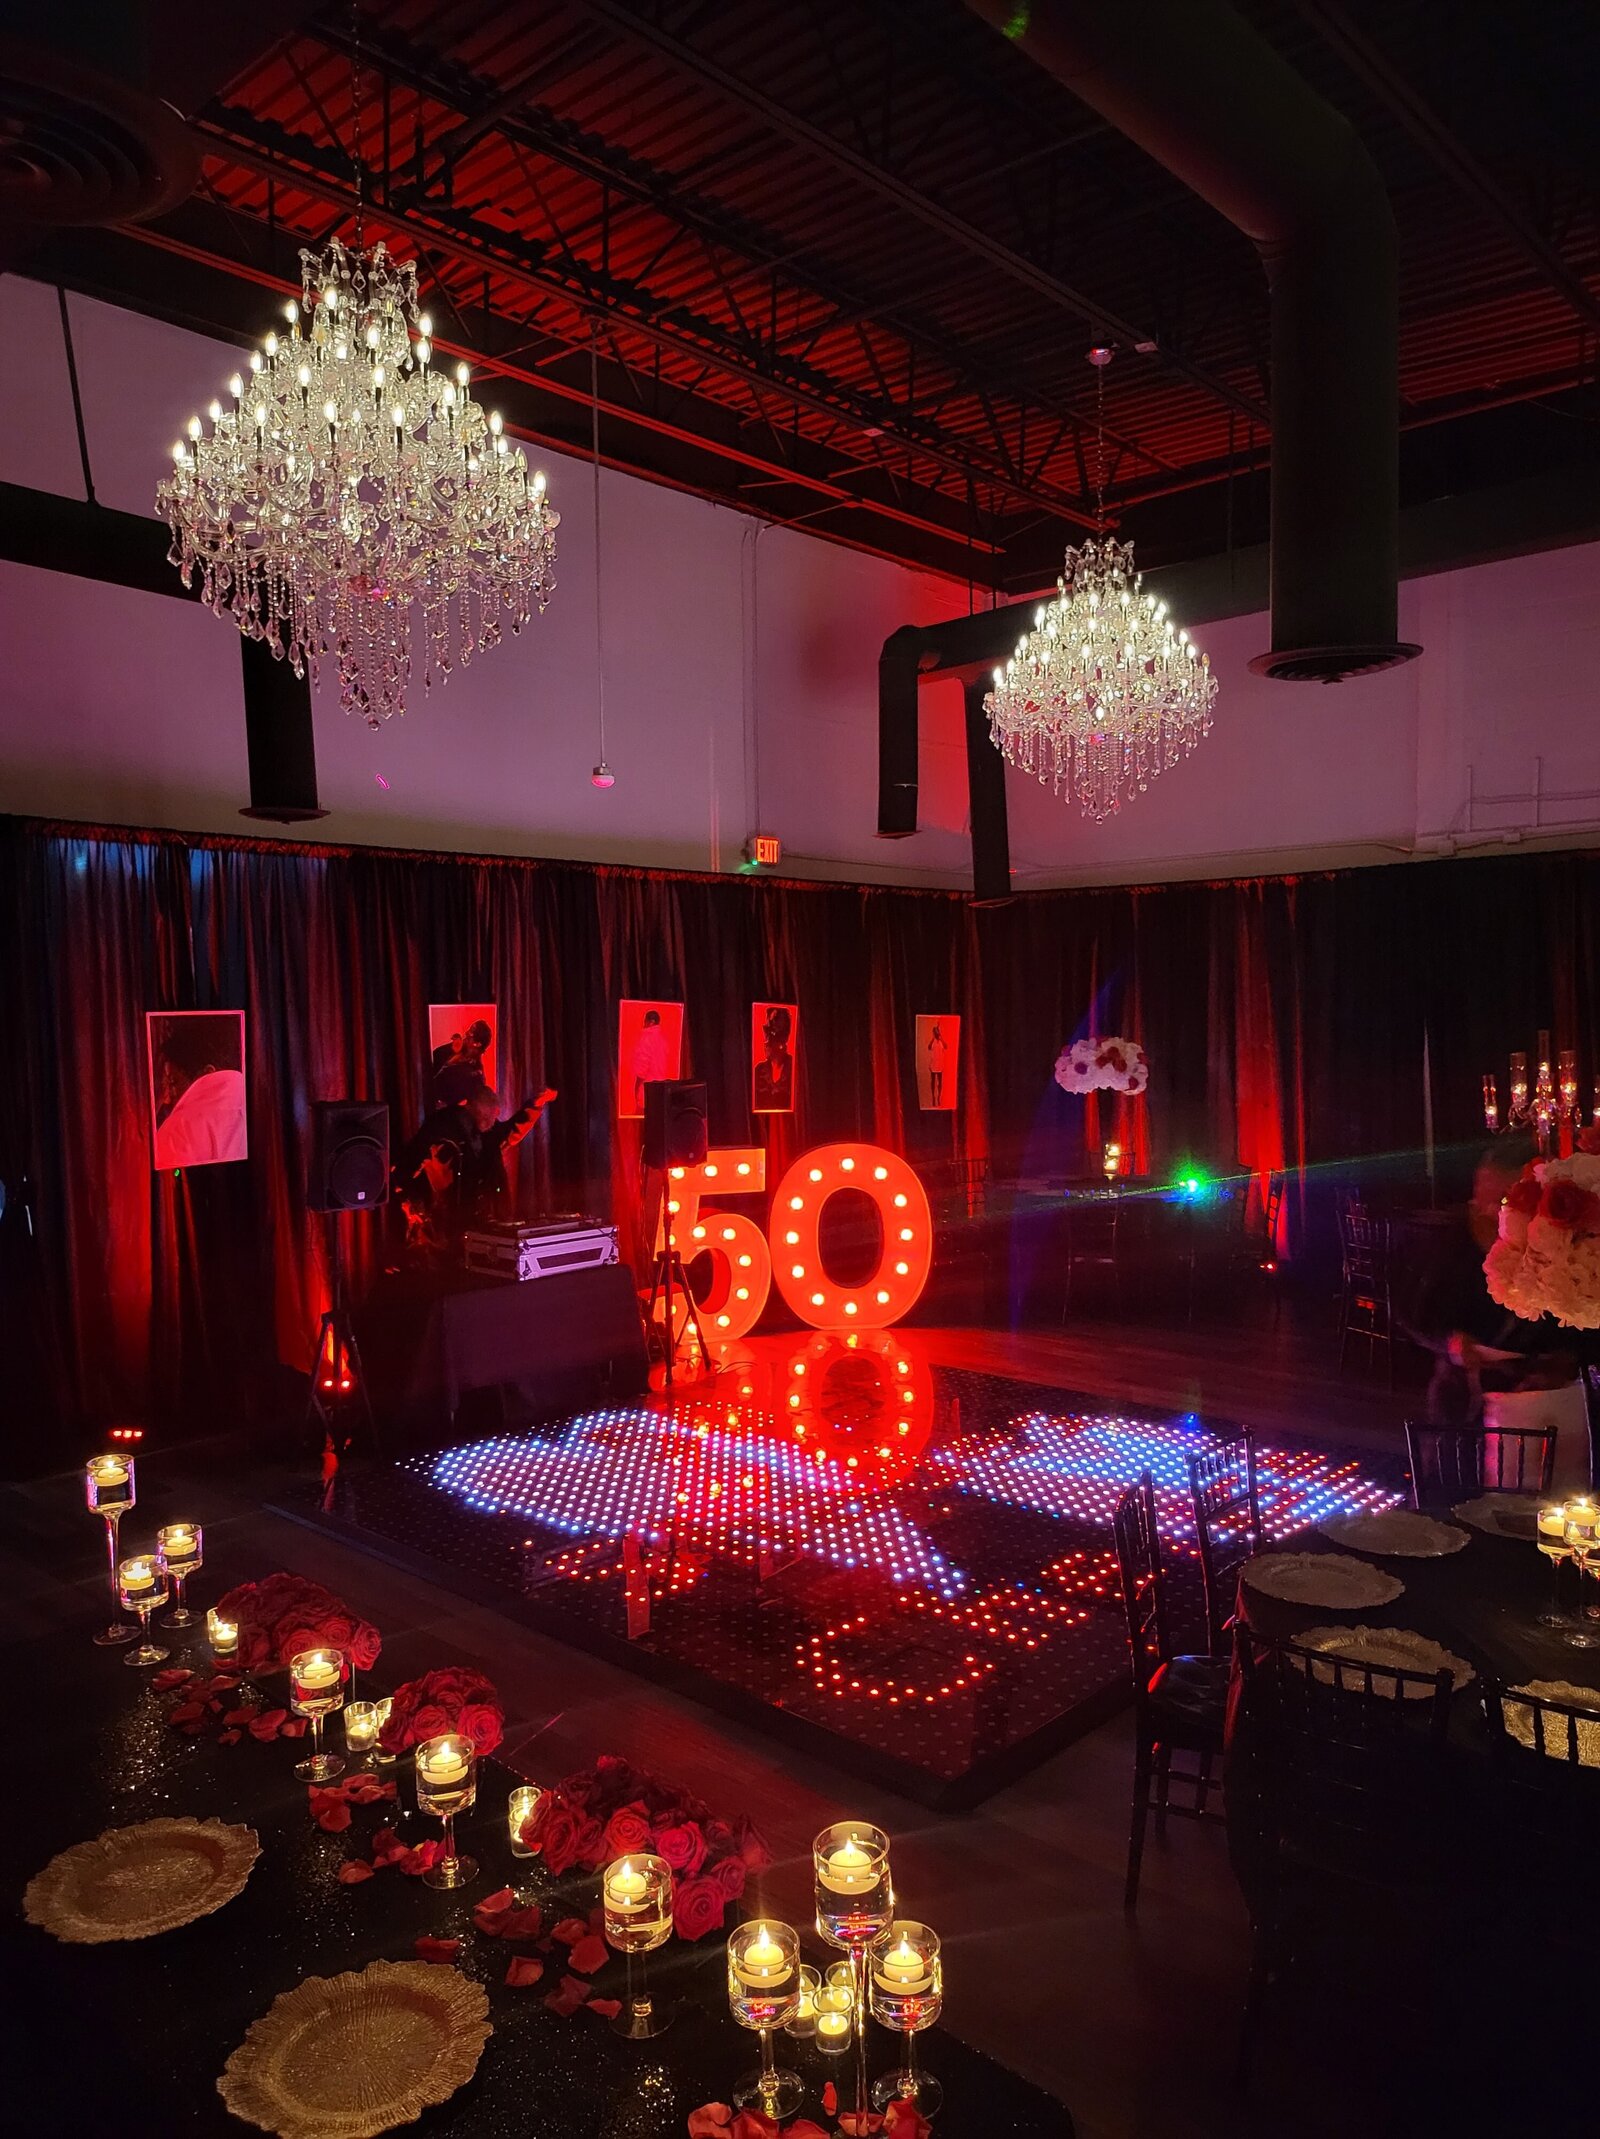 Birthday Party Event with LED Dance Floor Rental in Detroit Metro Event Space 20211016_182854-min